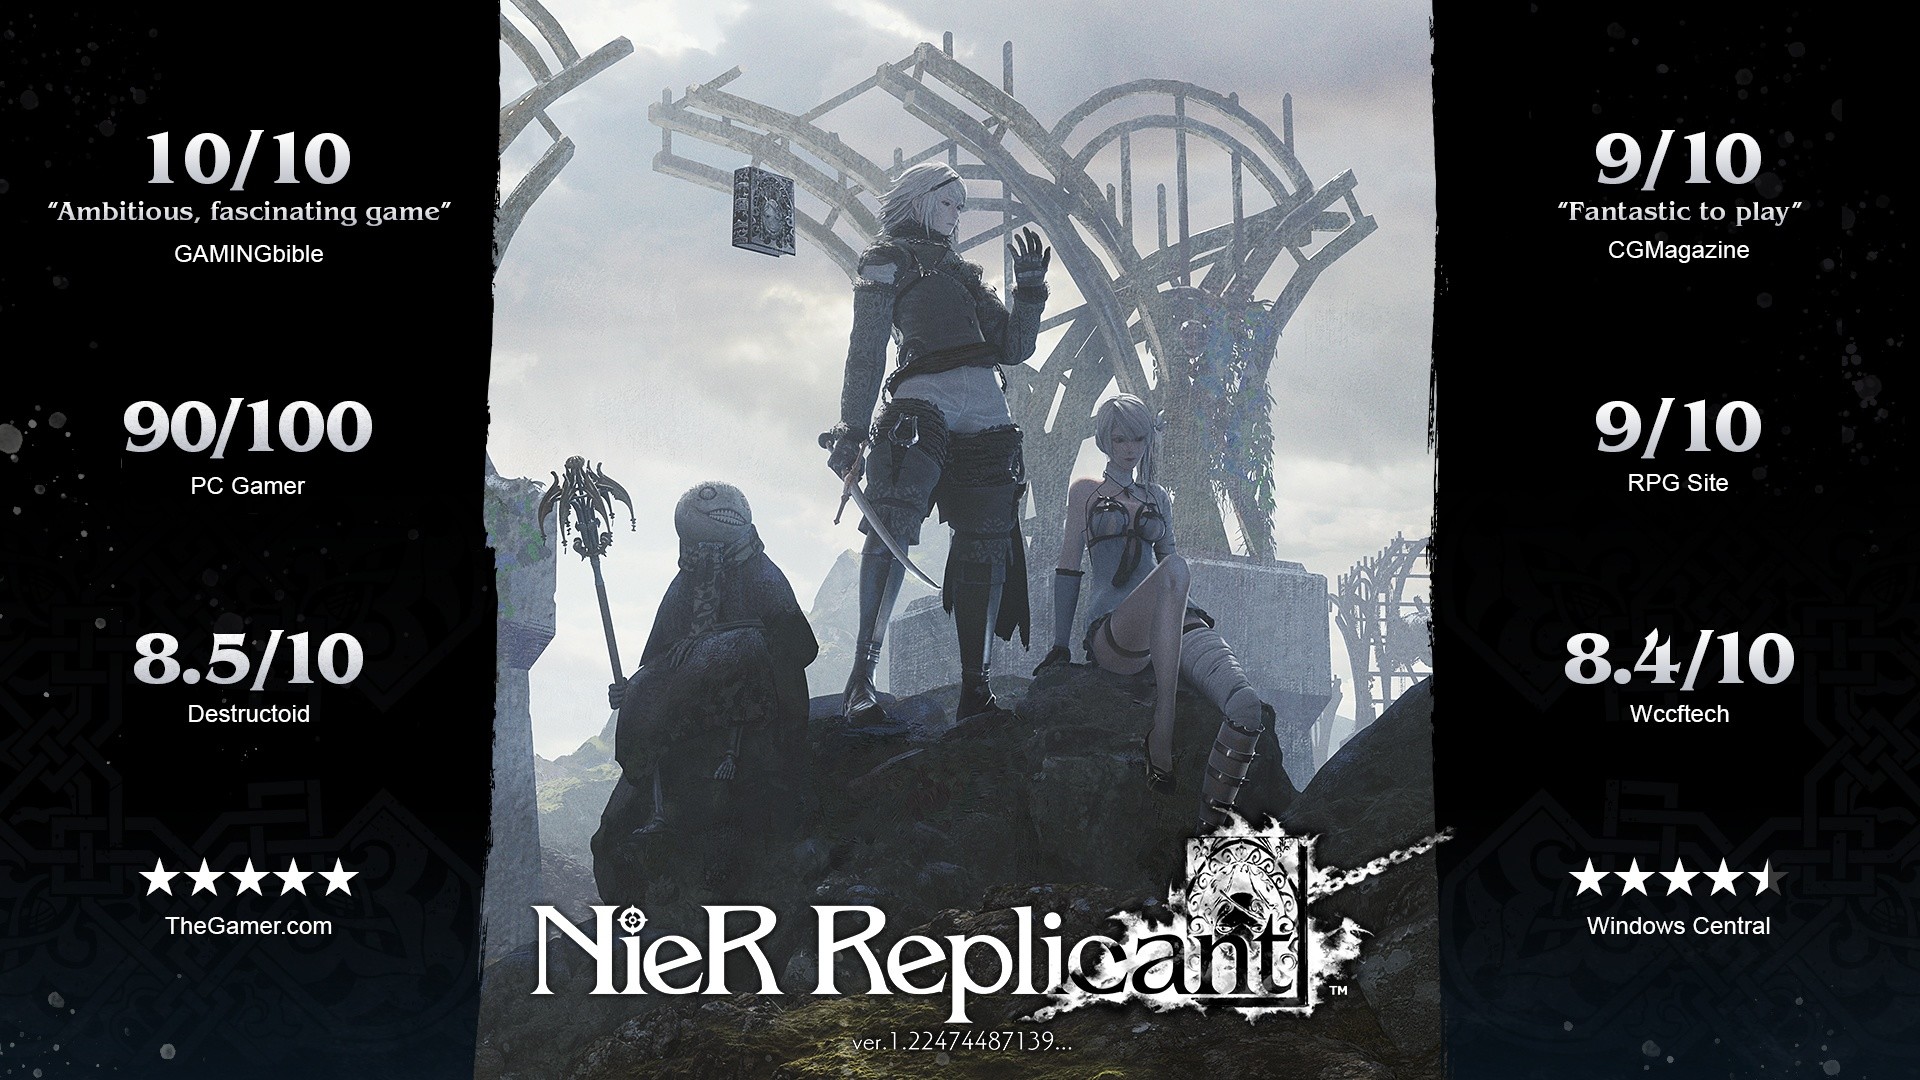 Square Enix on X: #NieR Replicant ver.1.22474487139 is on sale